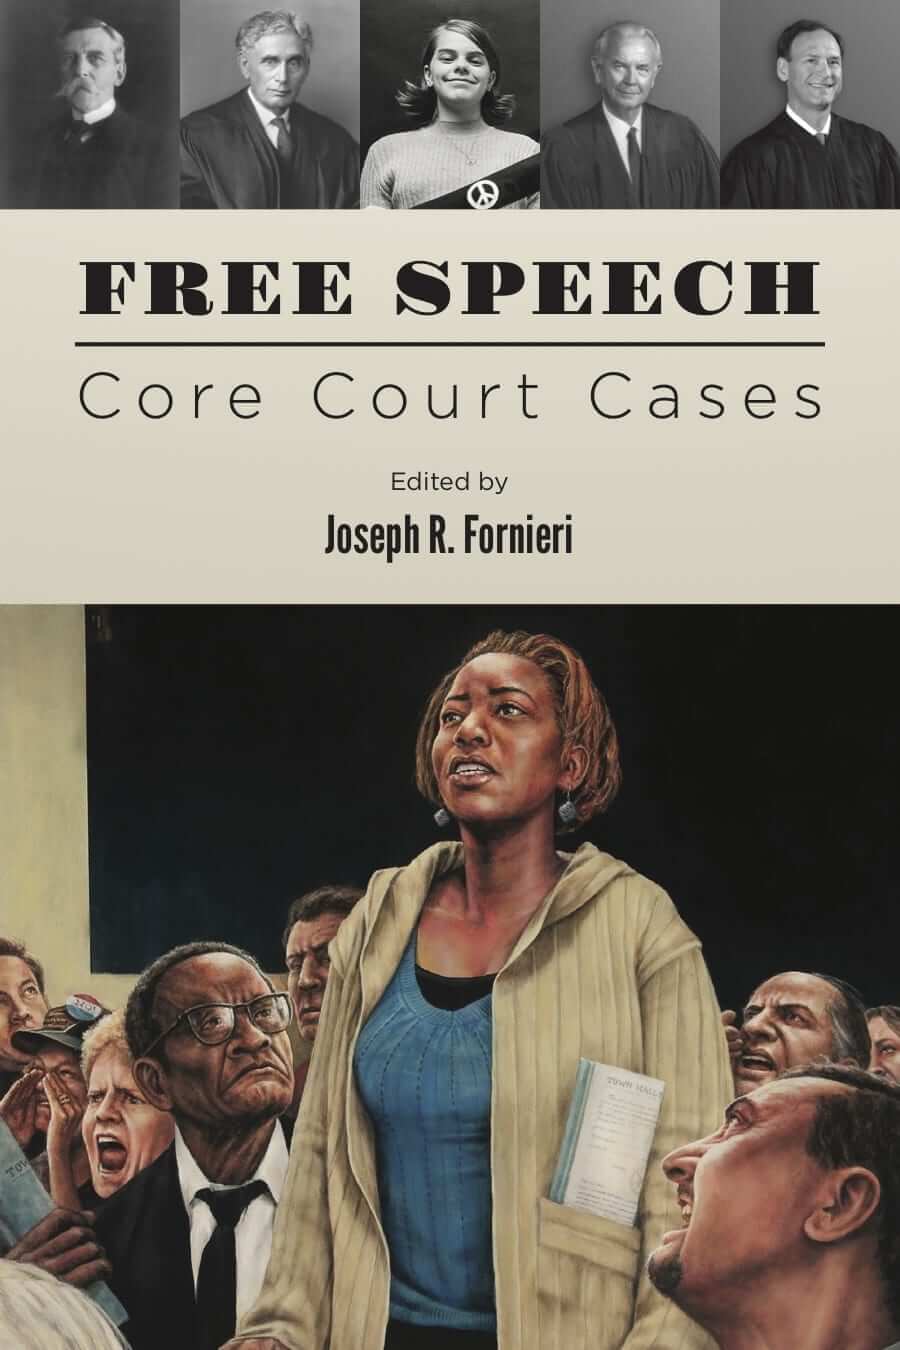 Cover art for the book Free Speech: Core Court Cases.